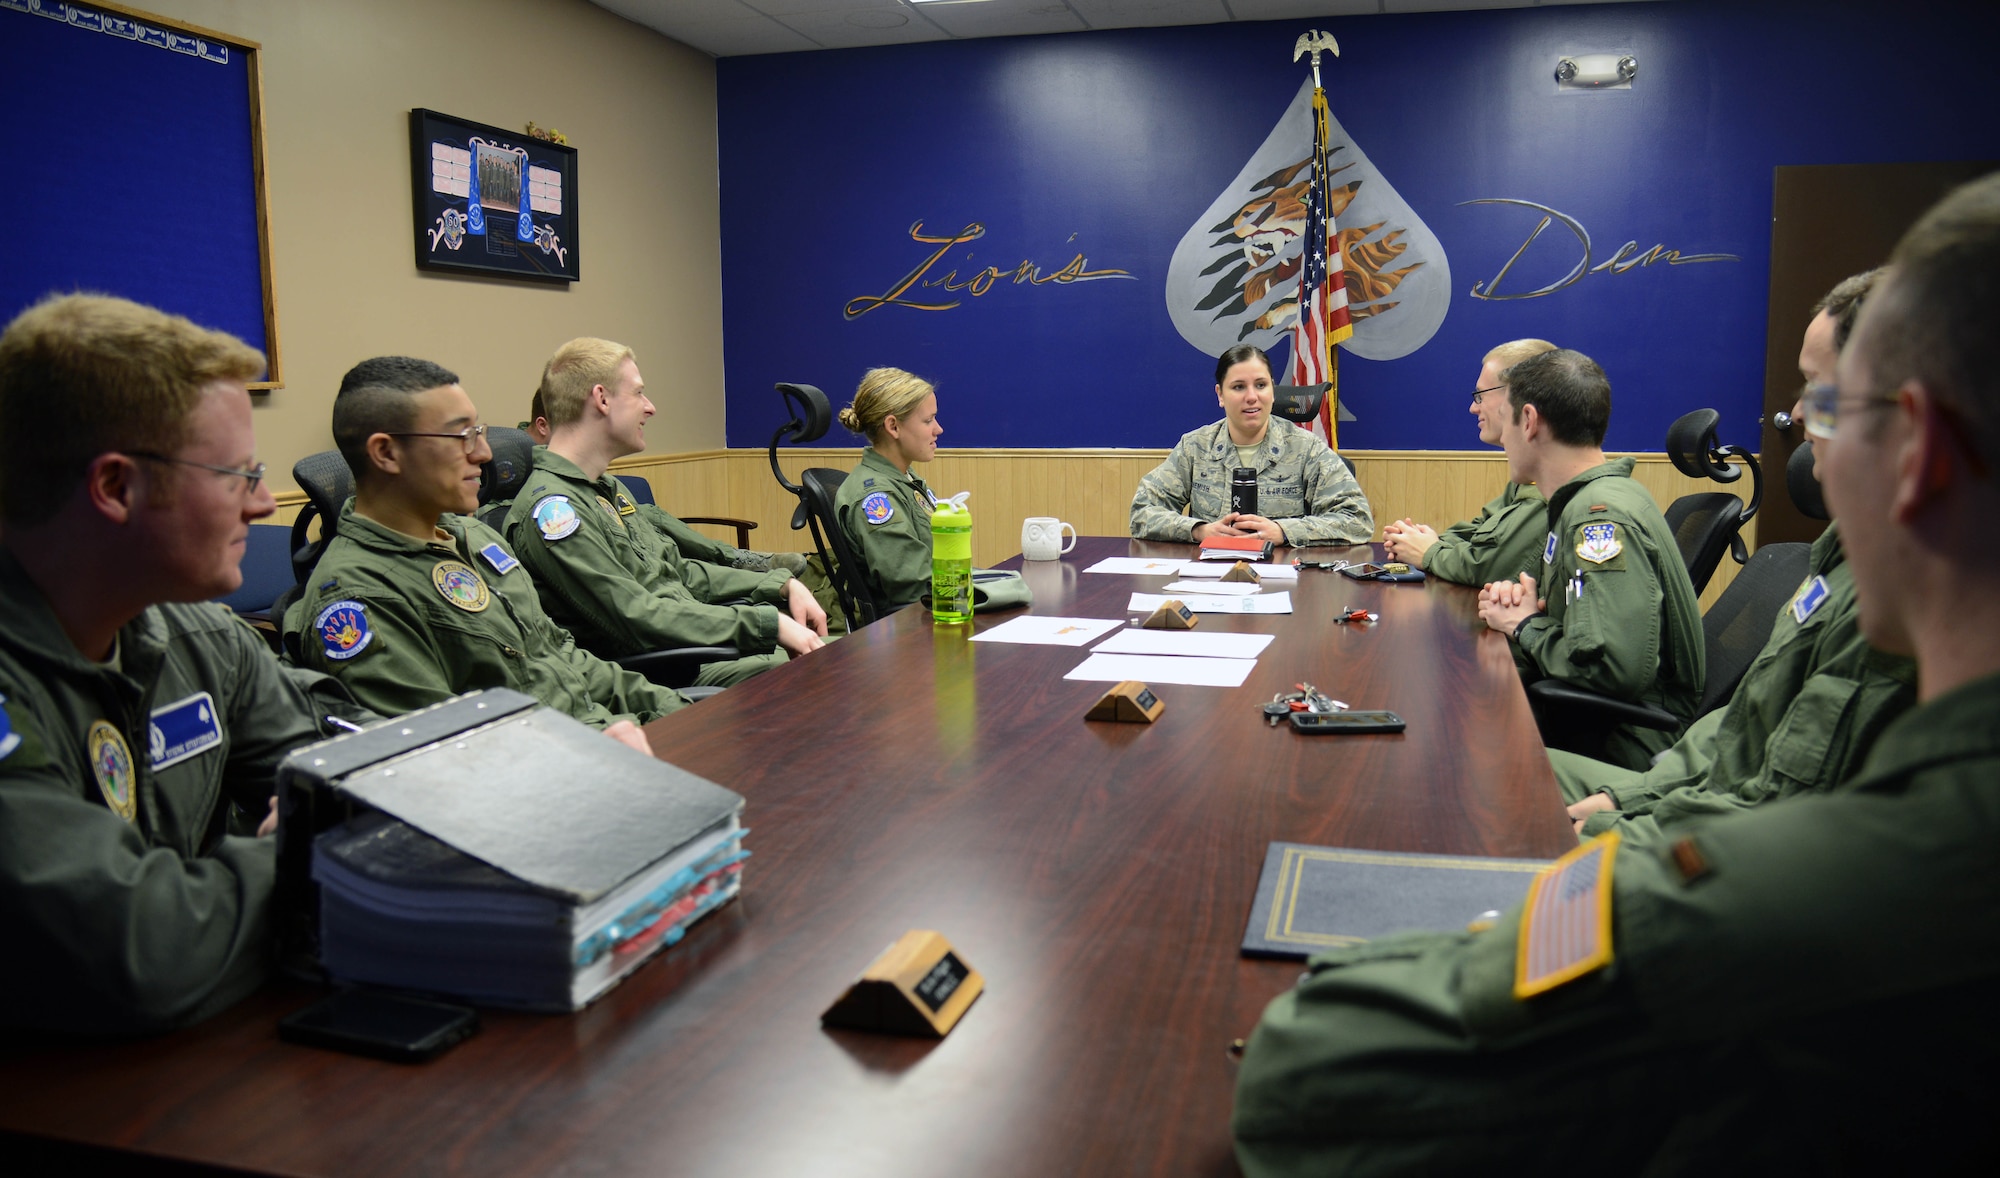 Members of the 10th Missile Squadron meet prior to dispatching to the missile field March 16, 2015, at Malmstrom Air Force Base, Mont. Before each dispatch, missileers meet with each other to discuss any pressing matters. (U.S. Air Force photo/Airman 1st Class Dillon Johnston)